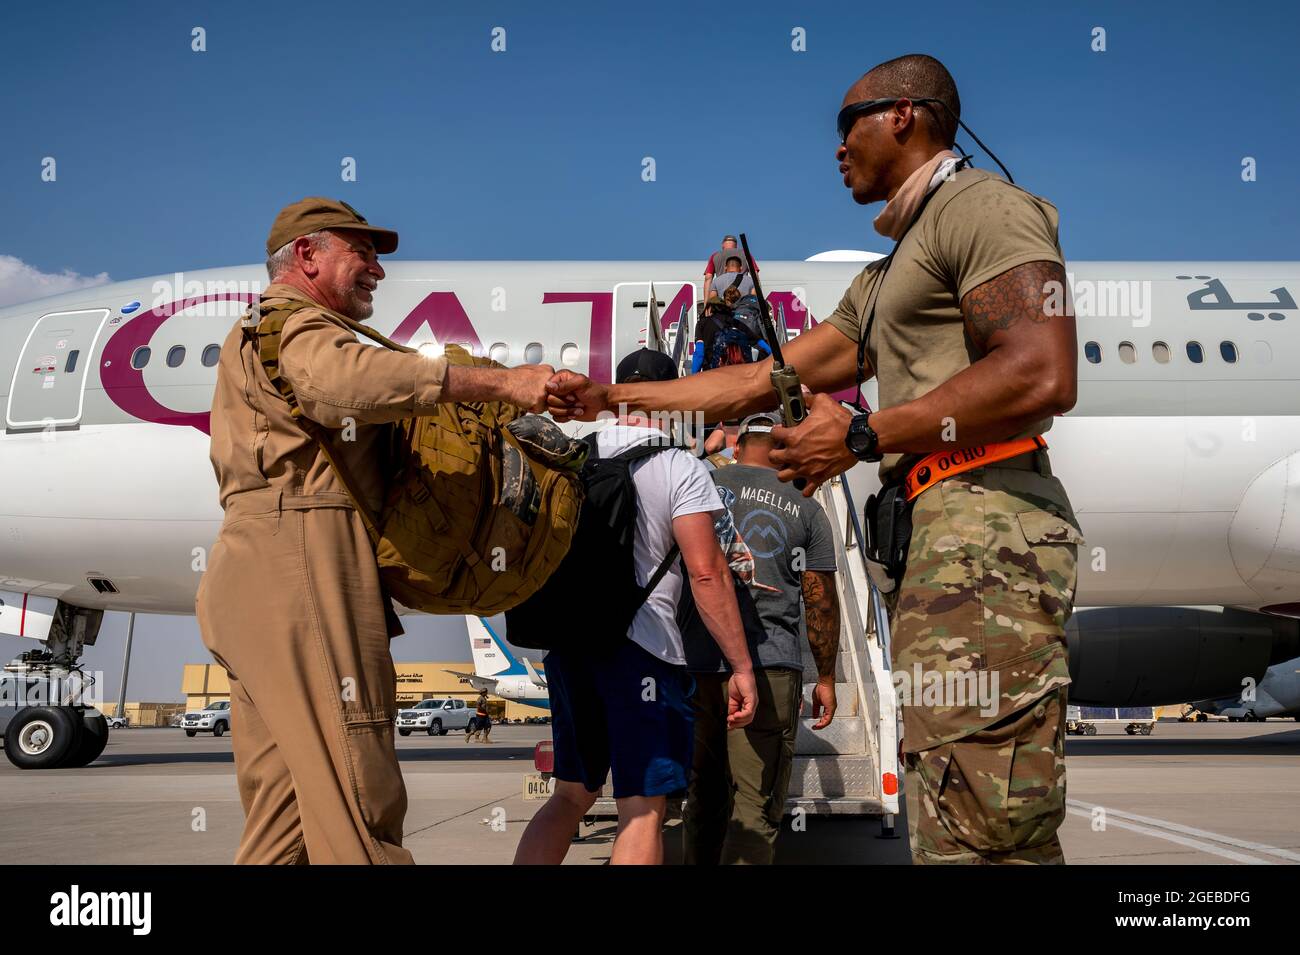 A member of the 8th Expeditionary Air Mobility Squadron assists U.S. Embassy personnel from Afghanistan as they board a Qatar Airways flight to Kuwait as part of Operation Allies Refuge Aug. 17, 2021, at Al Udeid Air Base, Qatar. The Department of Defense is committed to supporting the U.S. State Department in the departure of U.S. and allied civilian personnel from Afghanistan, and to evacuate Afghan allies to safety. (U.S. Air Force photo by Senior Airman Noah Coger) Stock Photo